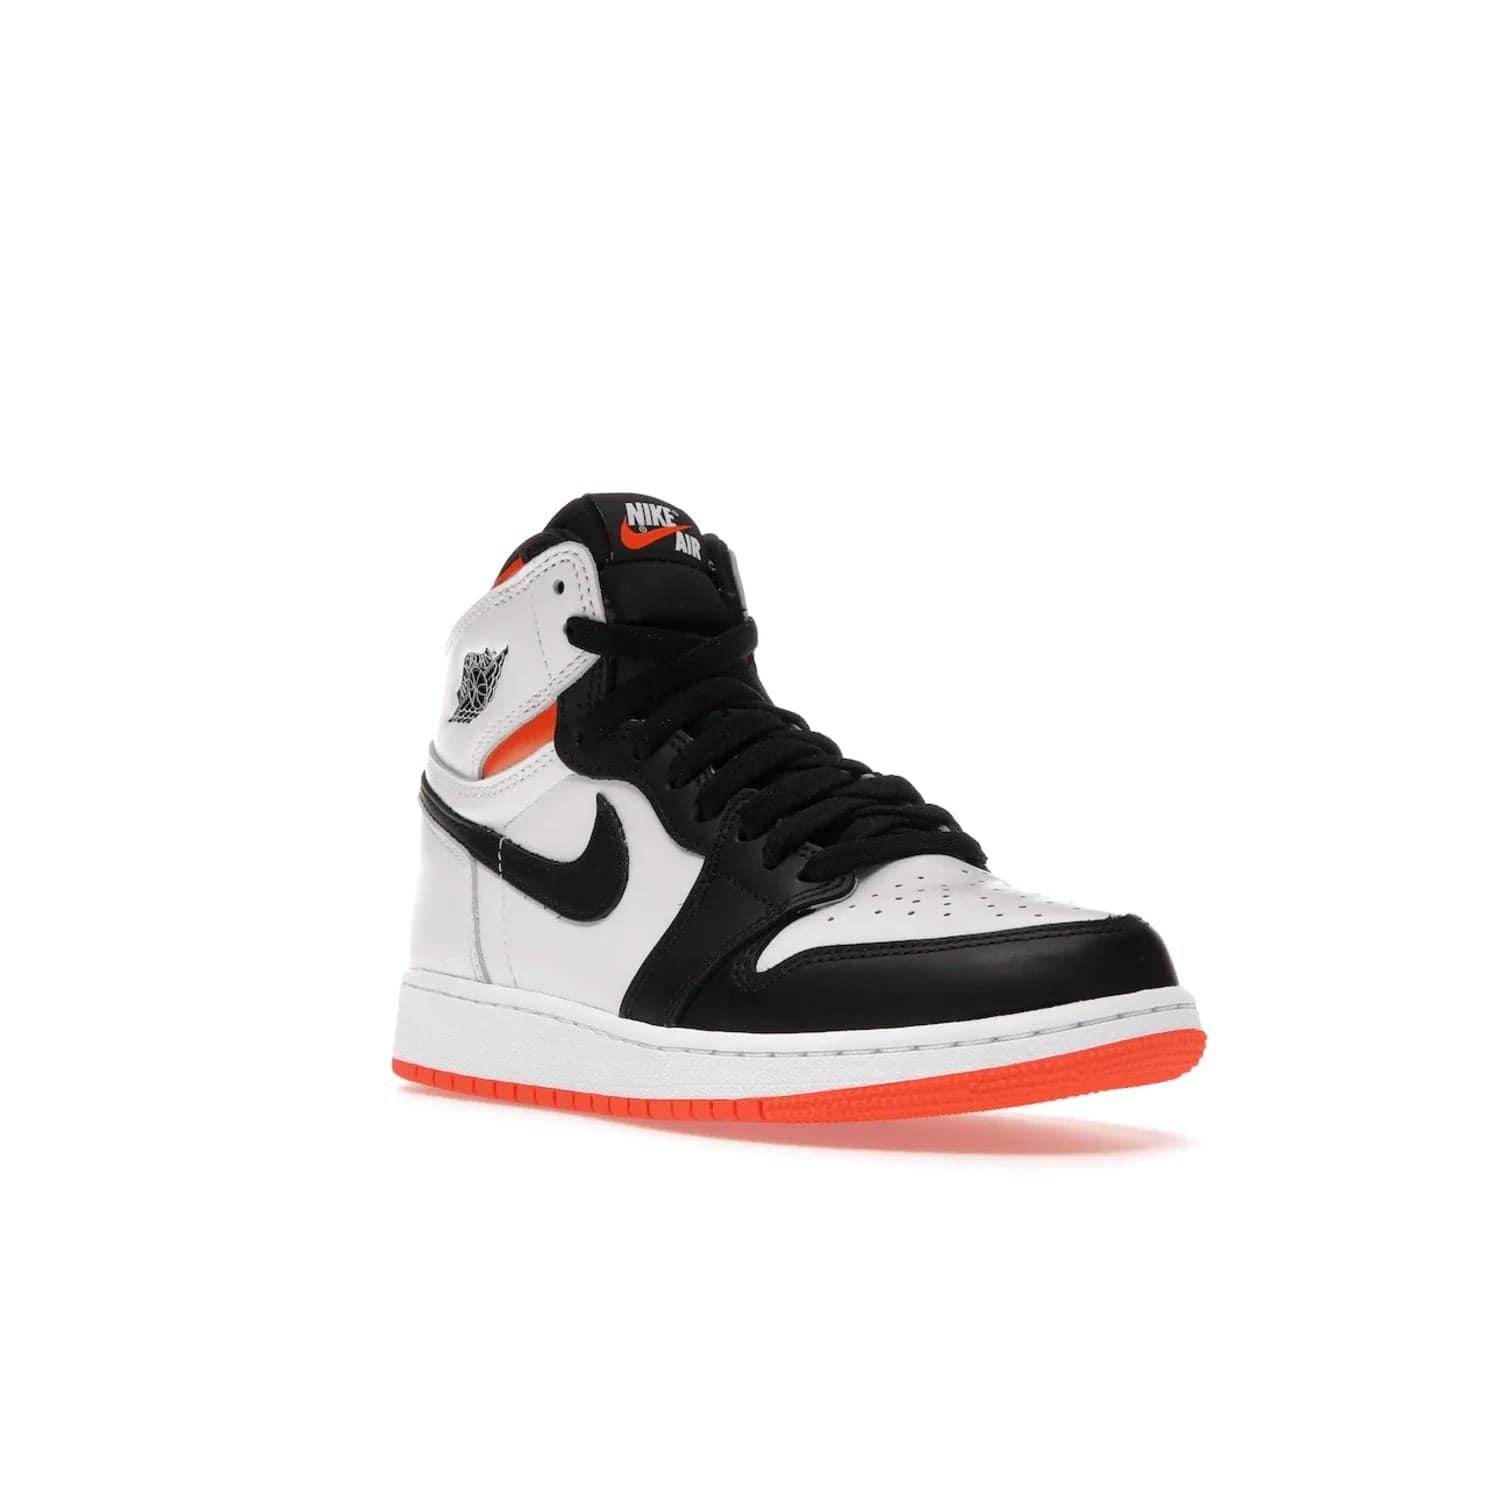 Jordan 1 High OG Electro Orange (GS) - Image 6 - Only at www.BallersClubKickz.com - The Air Jordan 1 High OG Electro Orange GS is the ideal shoe for kids on the go. Featuring white leather uppers, black overlays, and bright orange accents, it's sure to become a favorite. A great mix of classic style and vibrant colors, the shoe delivers air cushioning for comfort and hard orange rubber for grip. Release on July 17th, 2021. Get them a pair today.